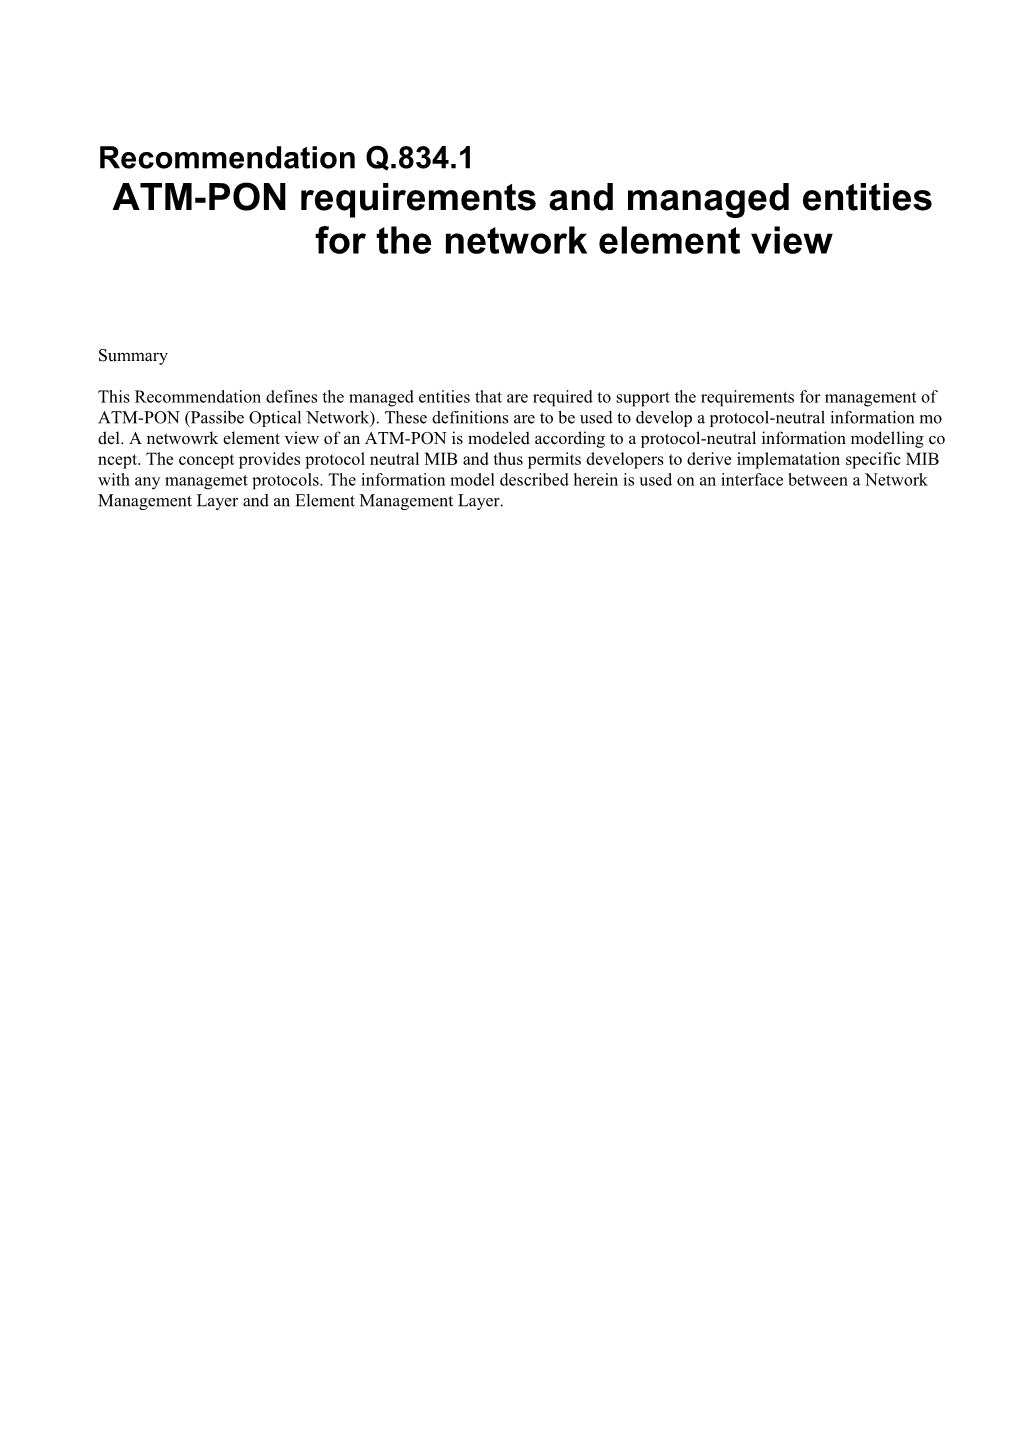 ATM-PON Requirements and Managed Entities for the Network Element View